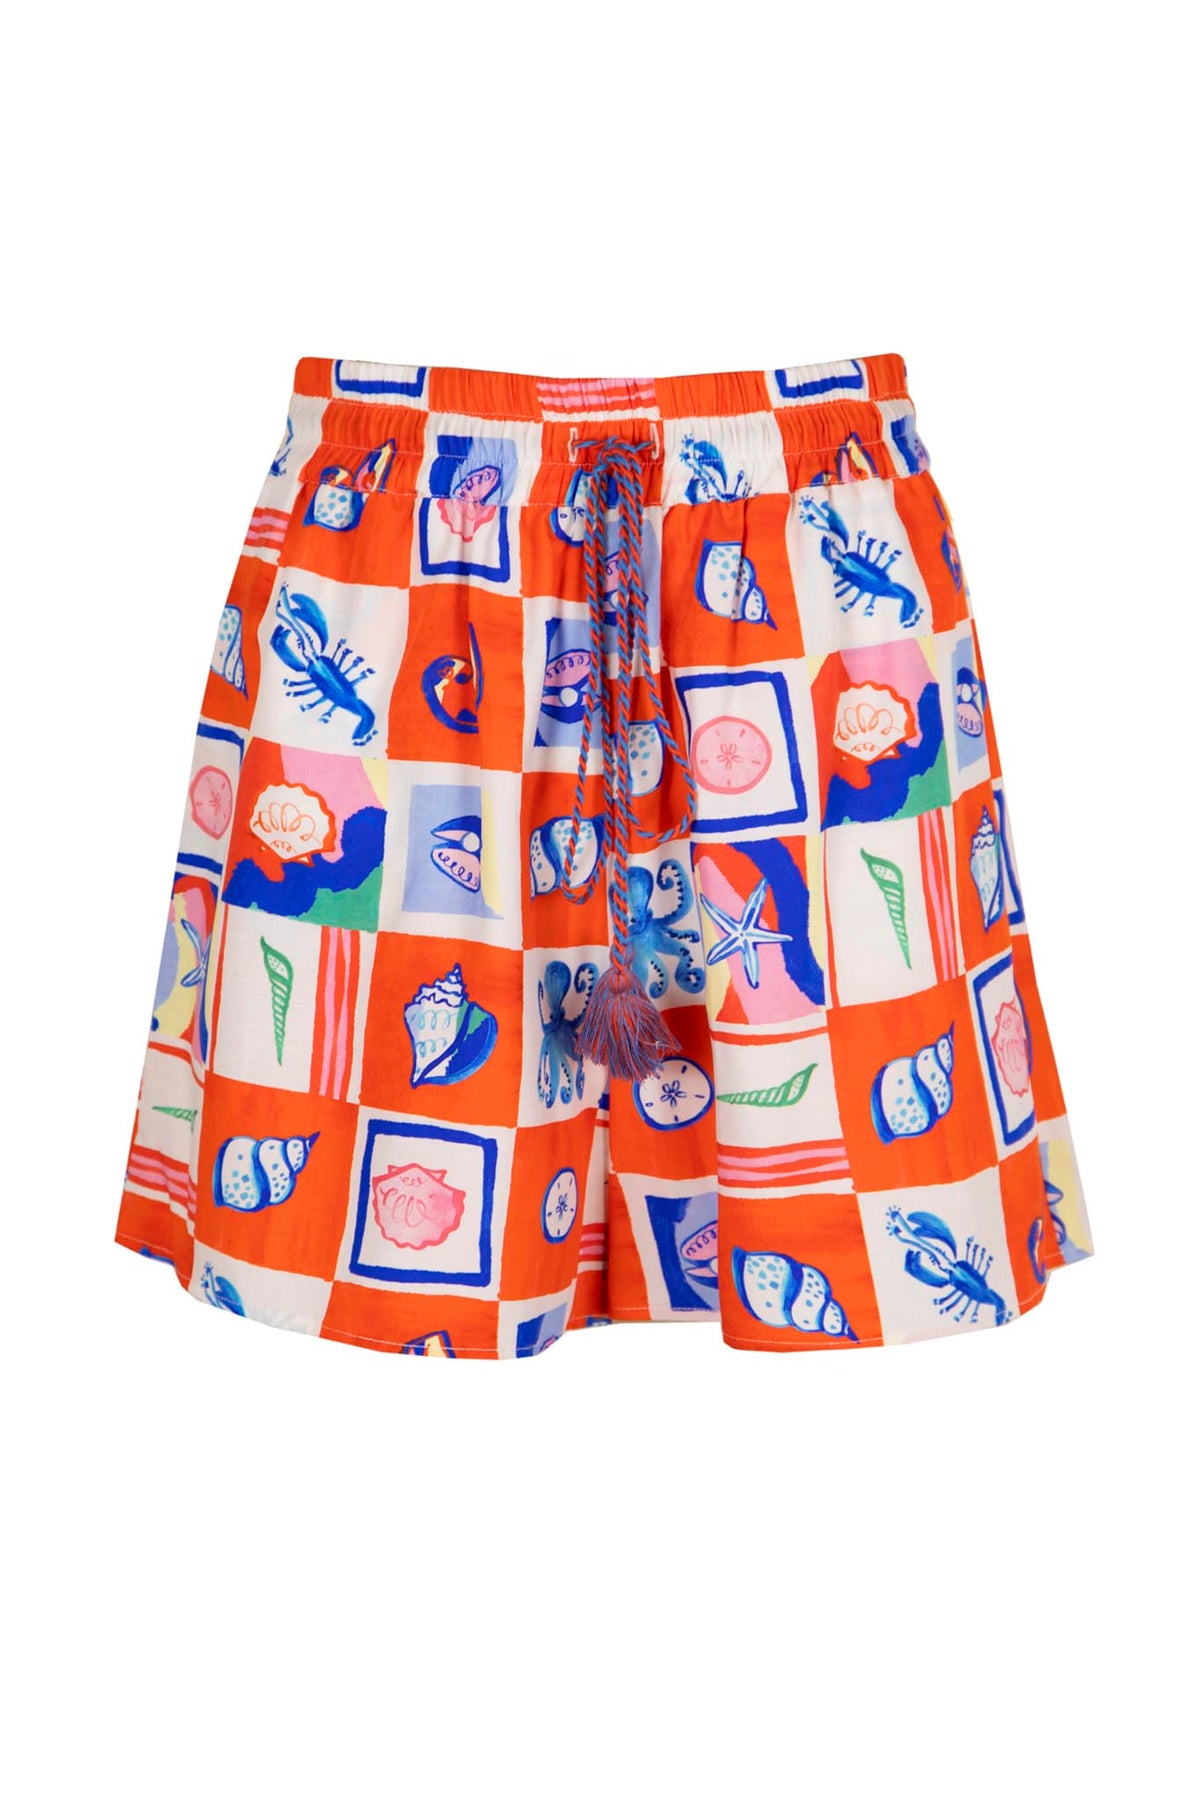 The Belle shorts have an elastic waist, a drawstring tassel, slant hip and back patch pockets.